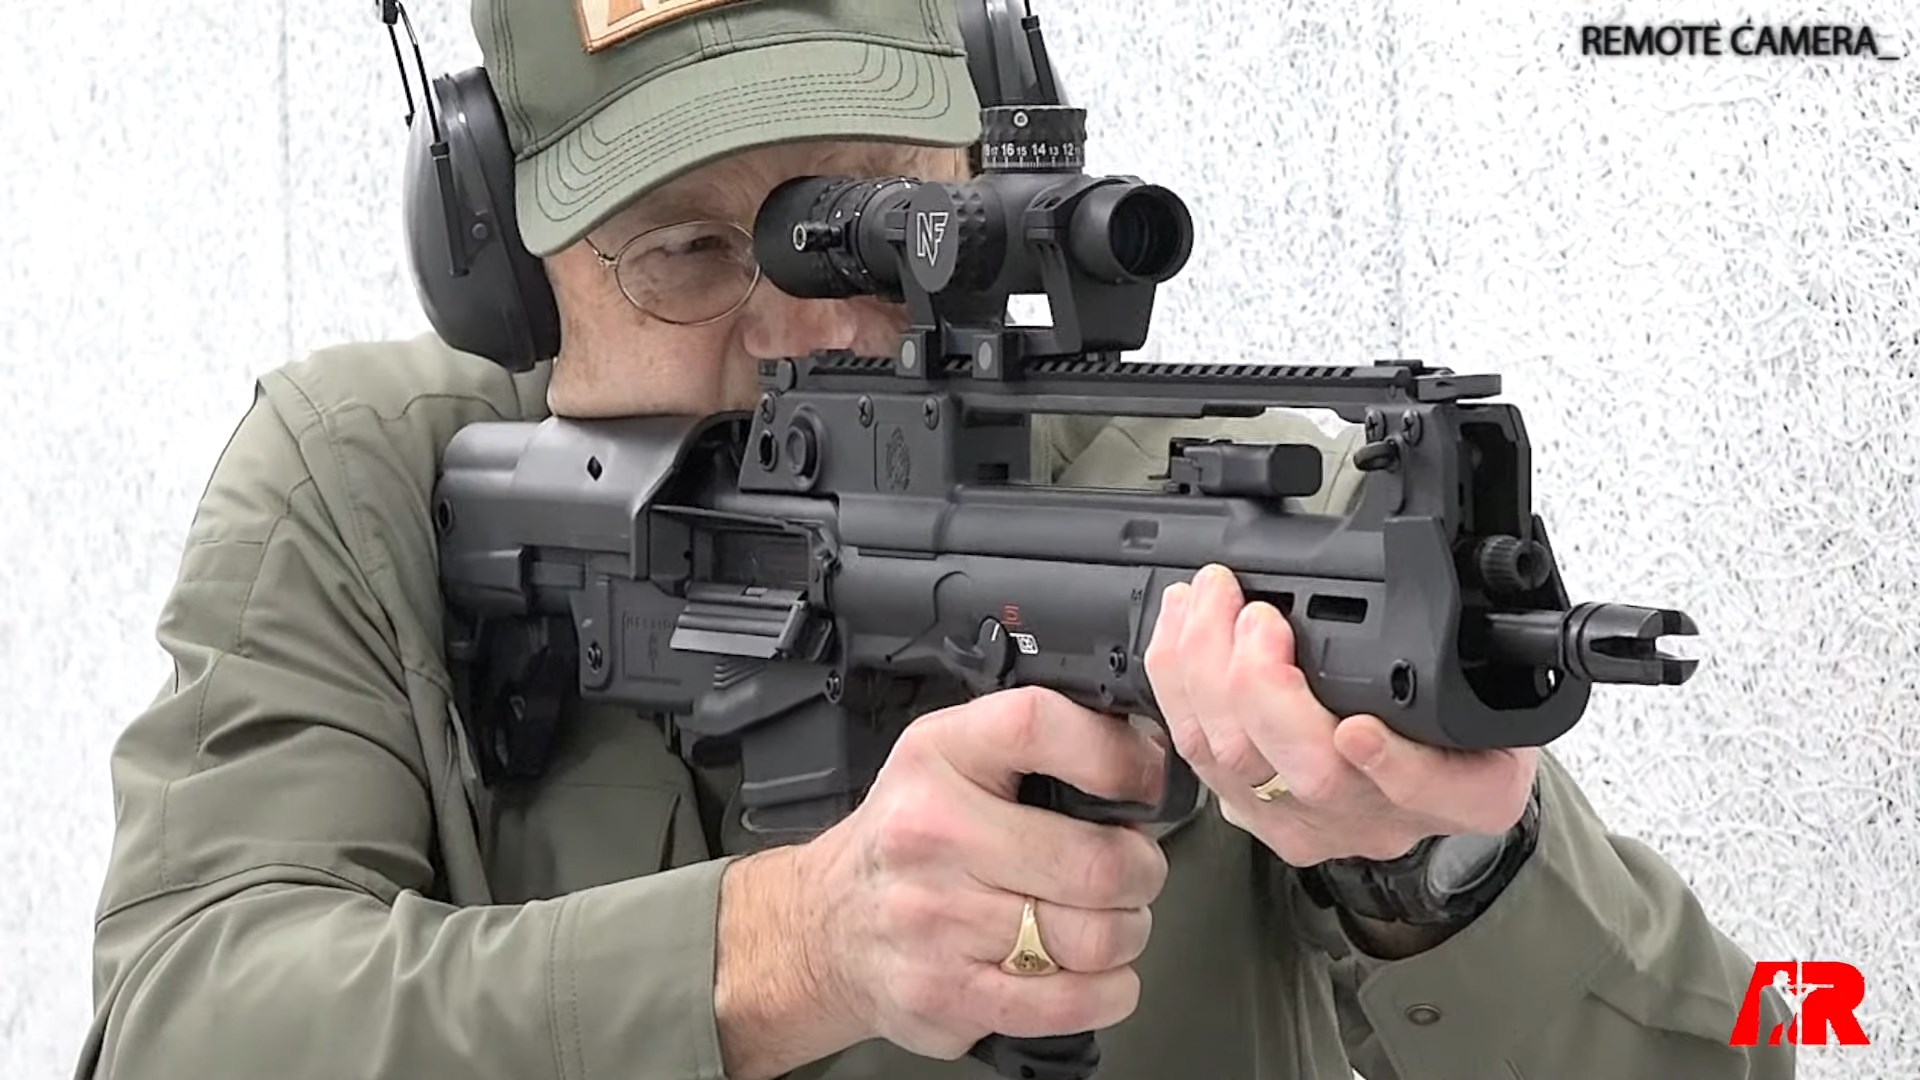 Editor In Chief American Rifleman's Brian Sheetz on the range with Springfield Armory Hellion Bullpup Rifle carbine black gun indoors white background safety gear remote camera